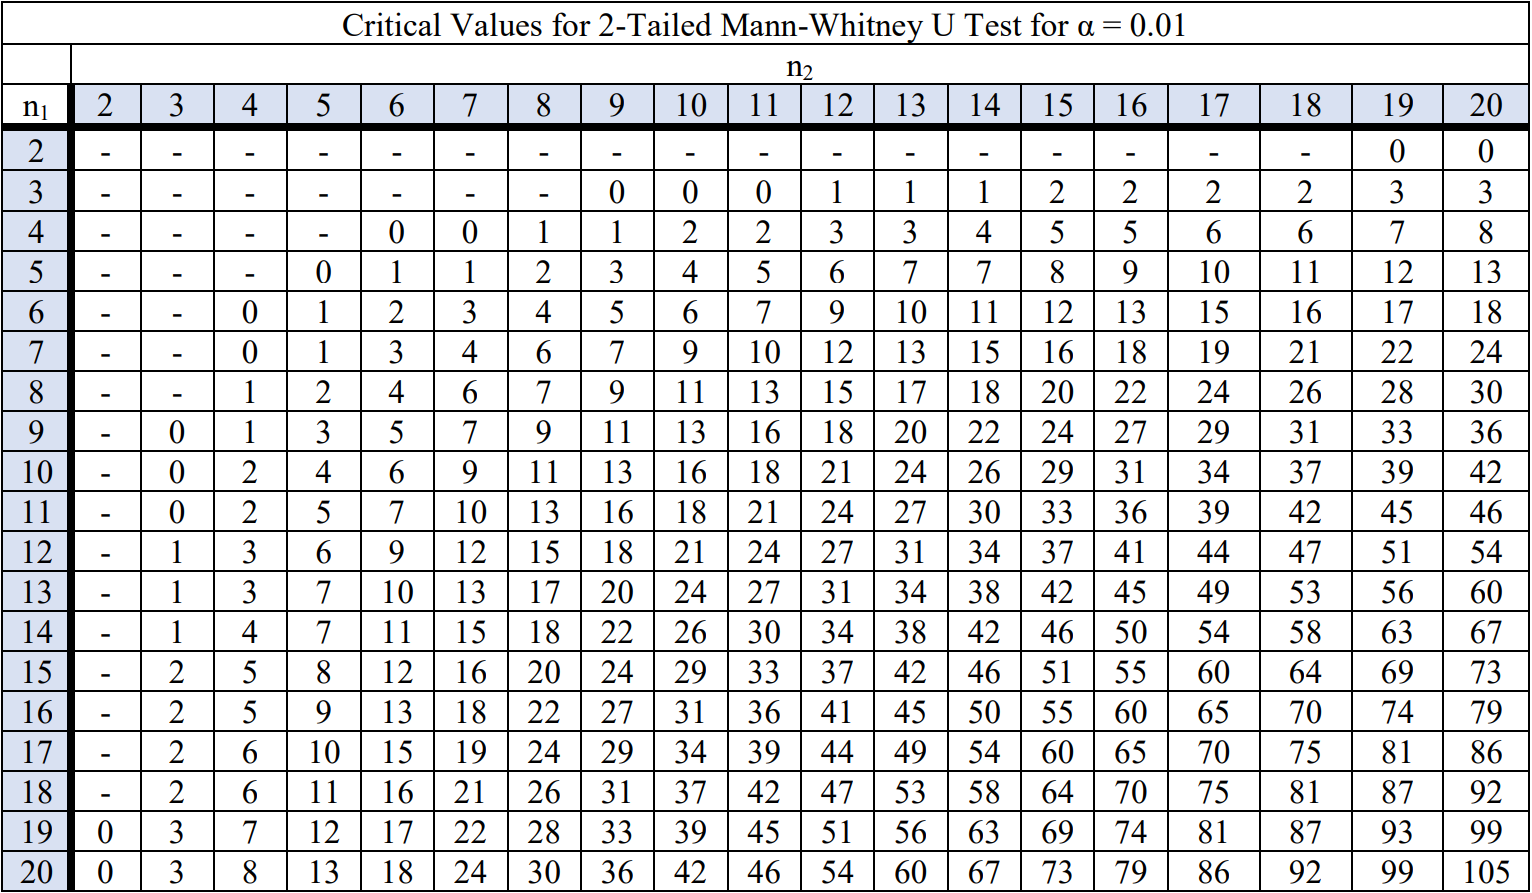 Table of critical values for 2-tailed Mann-Whitney U Test for alpha = 0.01.